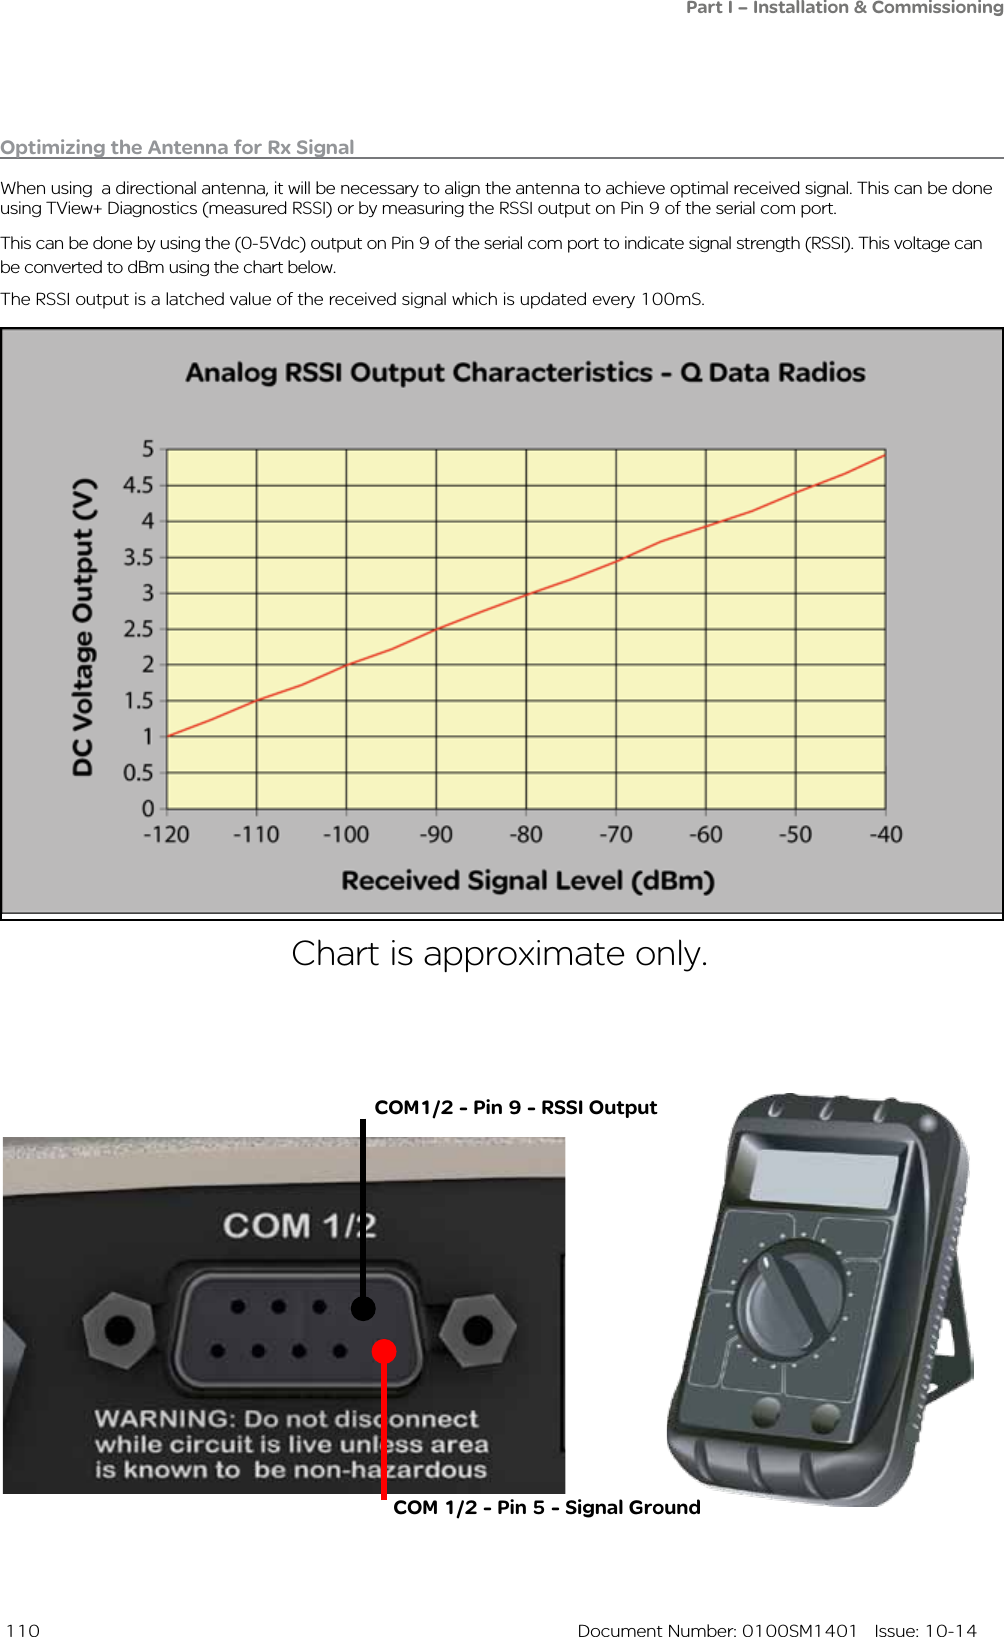  110  Document Number: 0100SM1401   Issue: 10-14Chart is approximate only. COM 1/2 - Pin 5 - Signal GroundCOM1/2 - Pin 9 - RSSI OutputOptimizing the Antenna for Rx SignalWhen using  a directional antenna, it will be necessary to align the antenna to achieve optimal received signal. This can be done using TView+ Diagnostics (measured RSSI) or by measuring the RSSI output on Pin 9 of the serial com port.This can be done by using the (0-5Vdc) output on Pin 9 of the serial com port to indicate signal strength (RSSI). This voltage can be converted to dBm using the chart below.The RSSI output is a latched value of the received signal which is updated every 100mS. Part I – Installation &amp; Commissioning